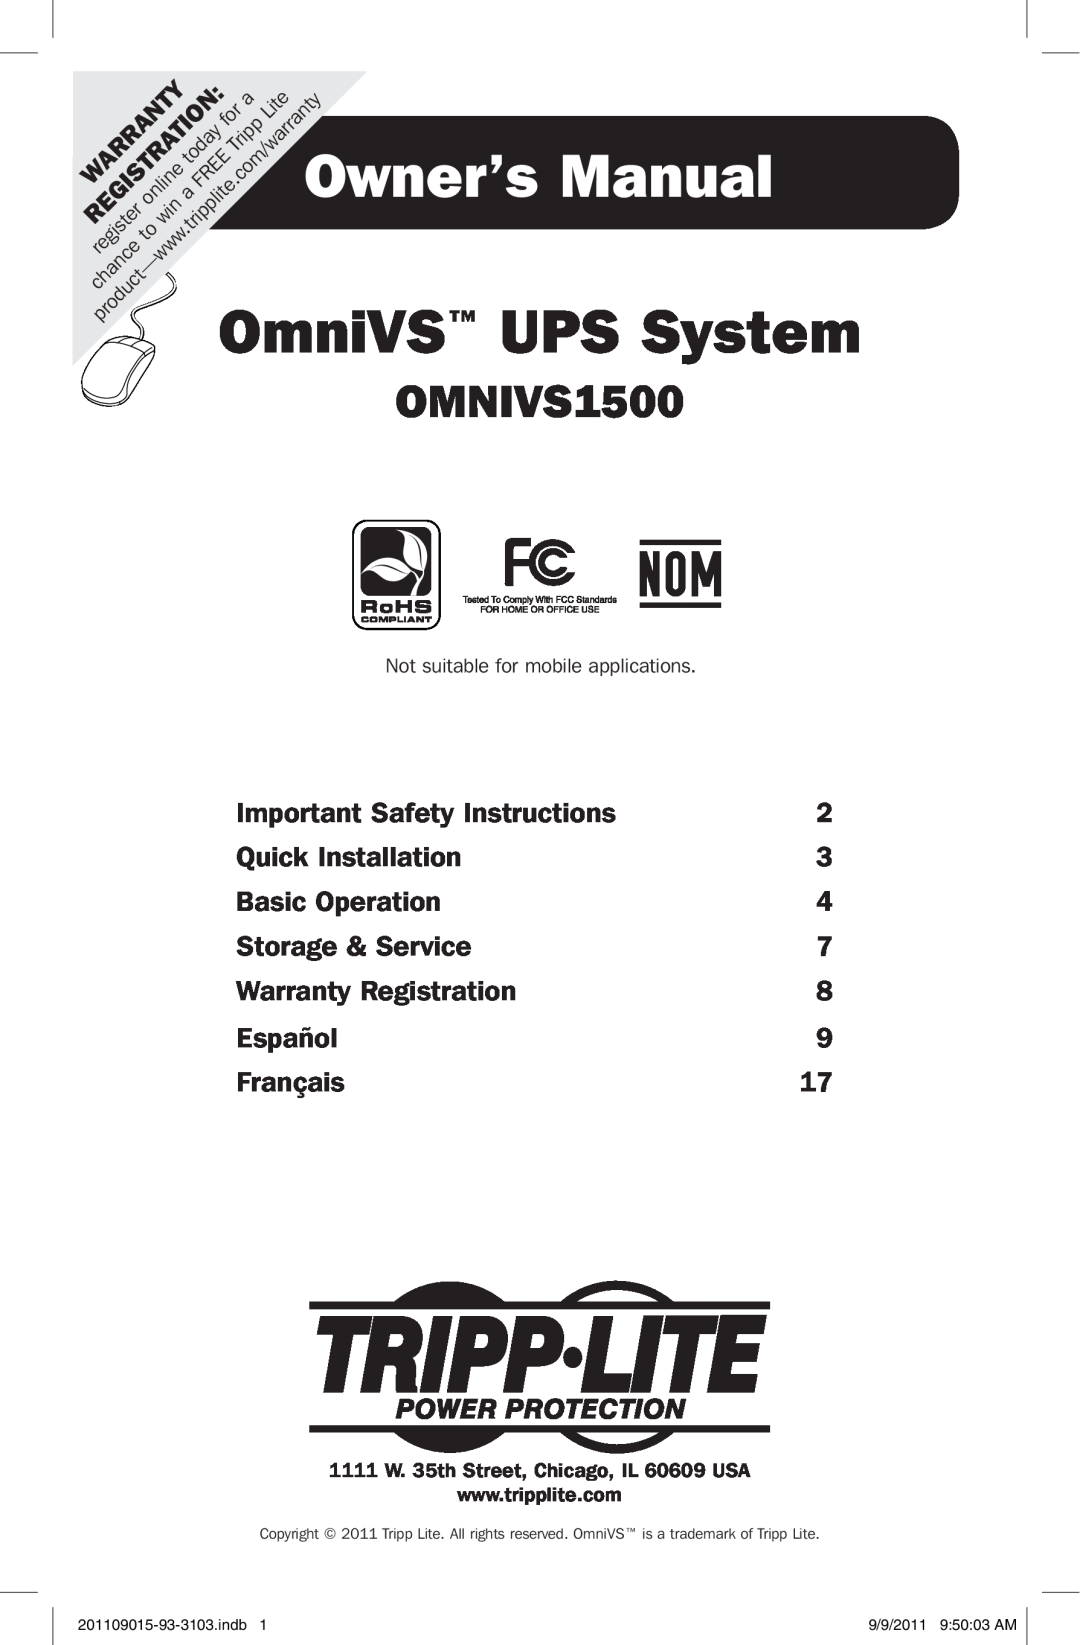 Tripp Lite OMNIVS1500 owner manual Owner’s Manual, OmniVS UPS System, Important Safety Instructions, Quick Installation 